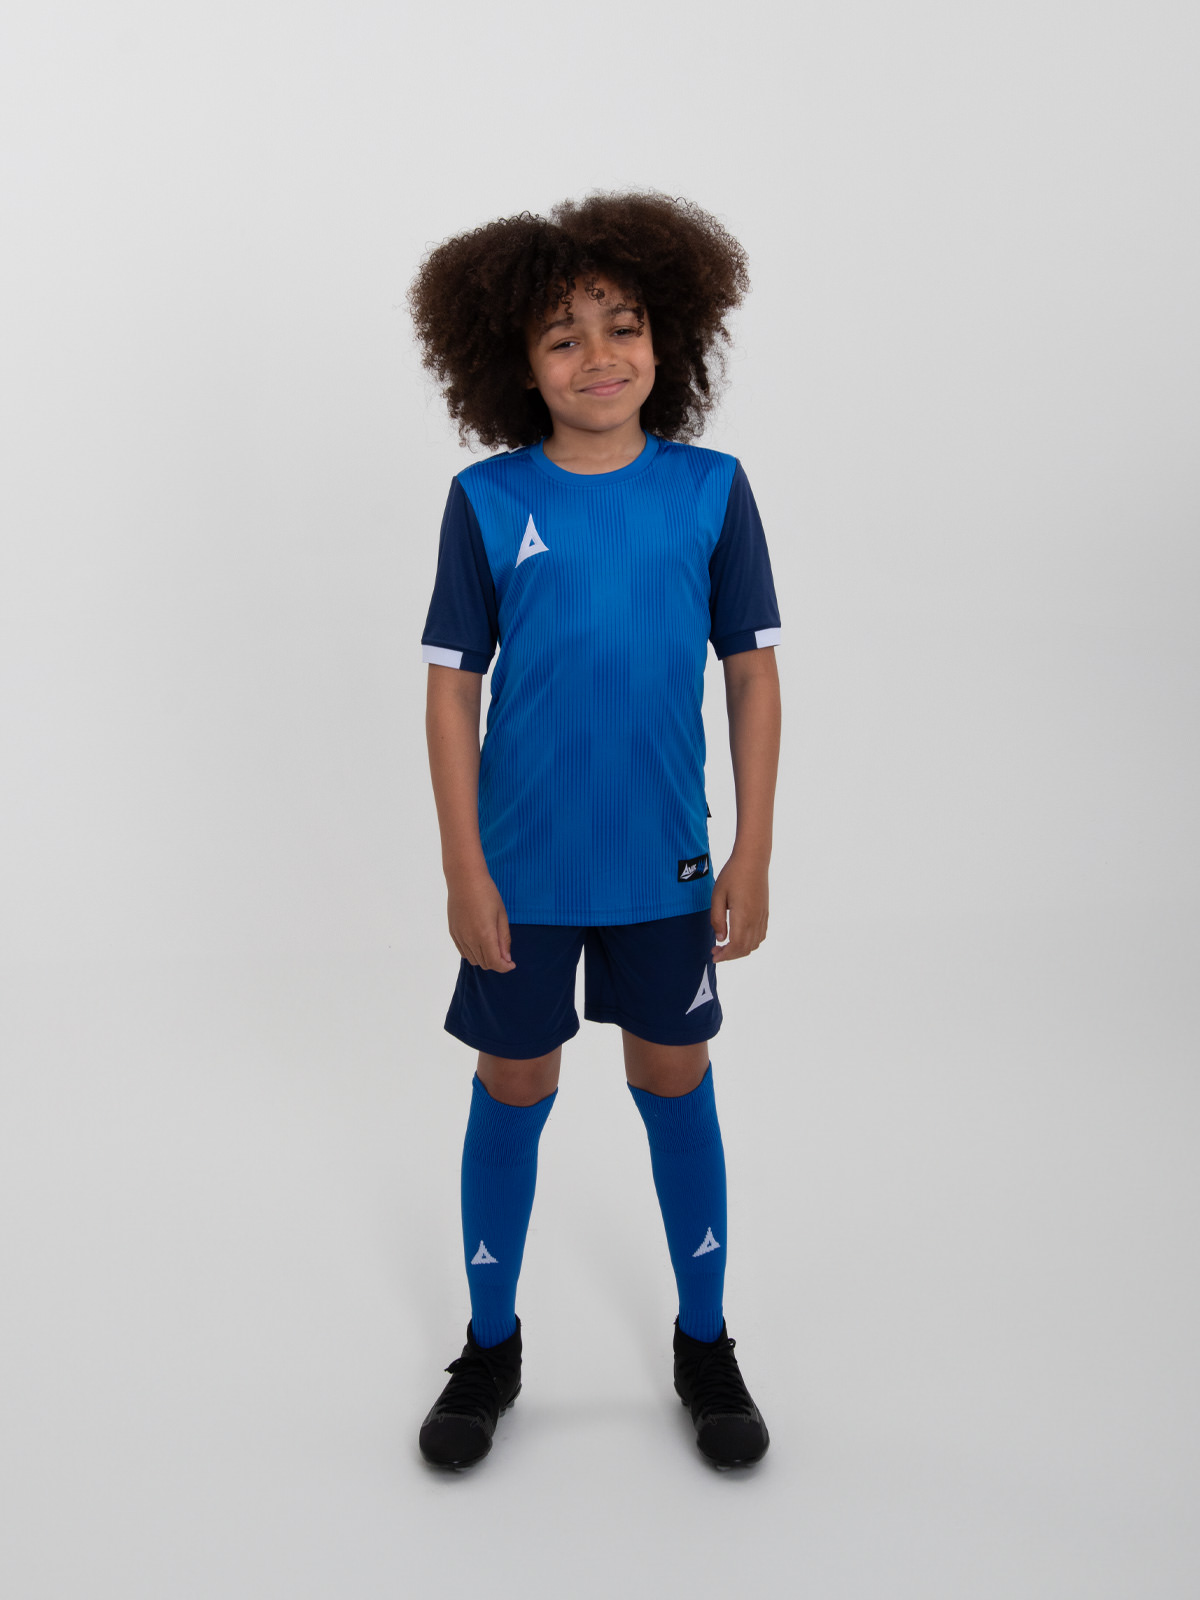 a young child is wearing a royal blue football kit, navy shorts and royal blue socks.